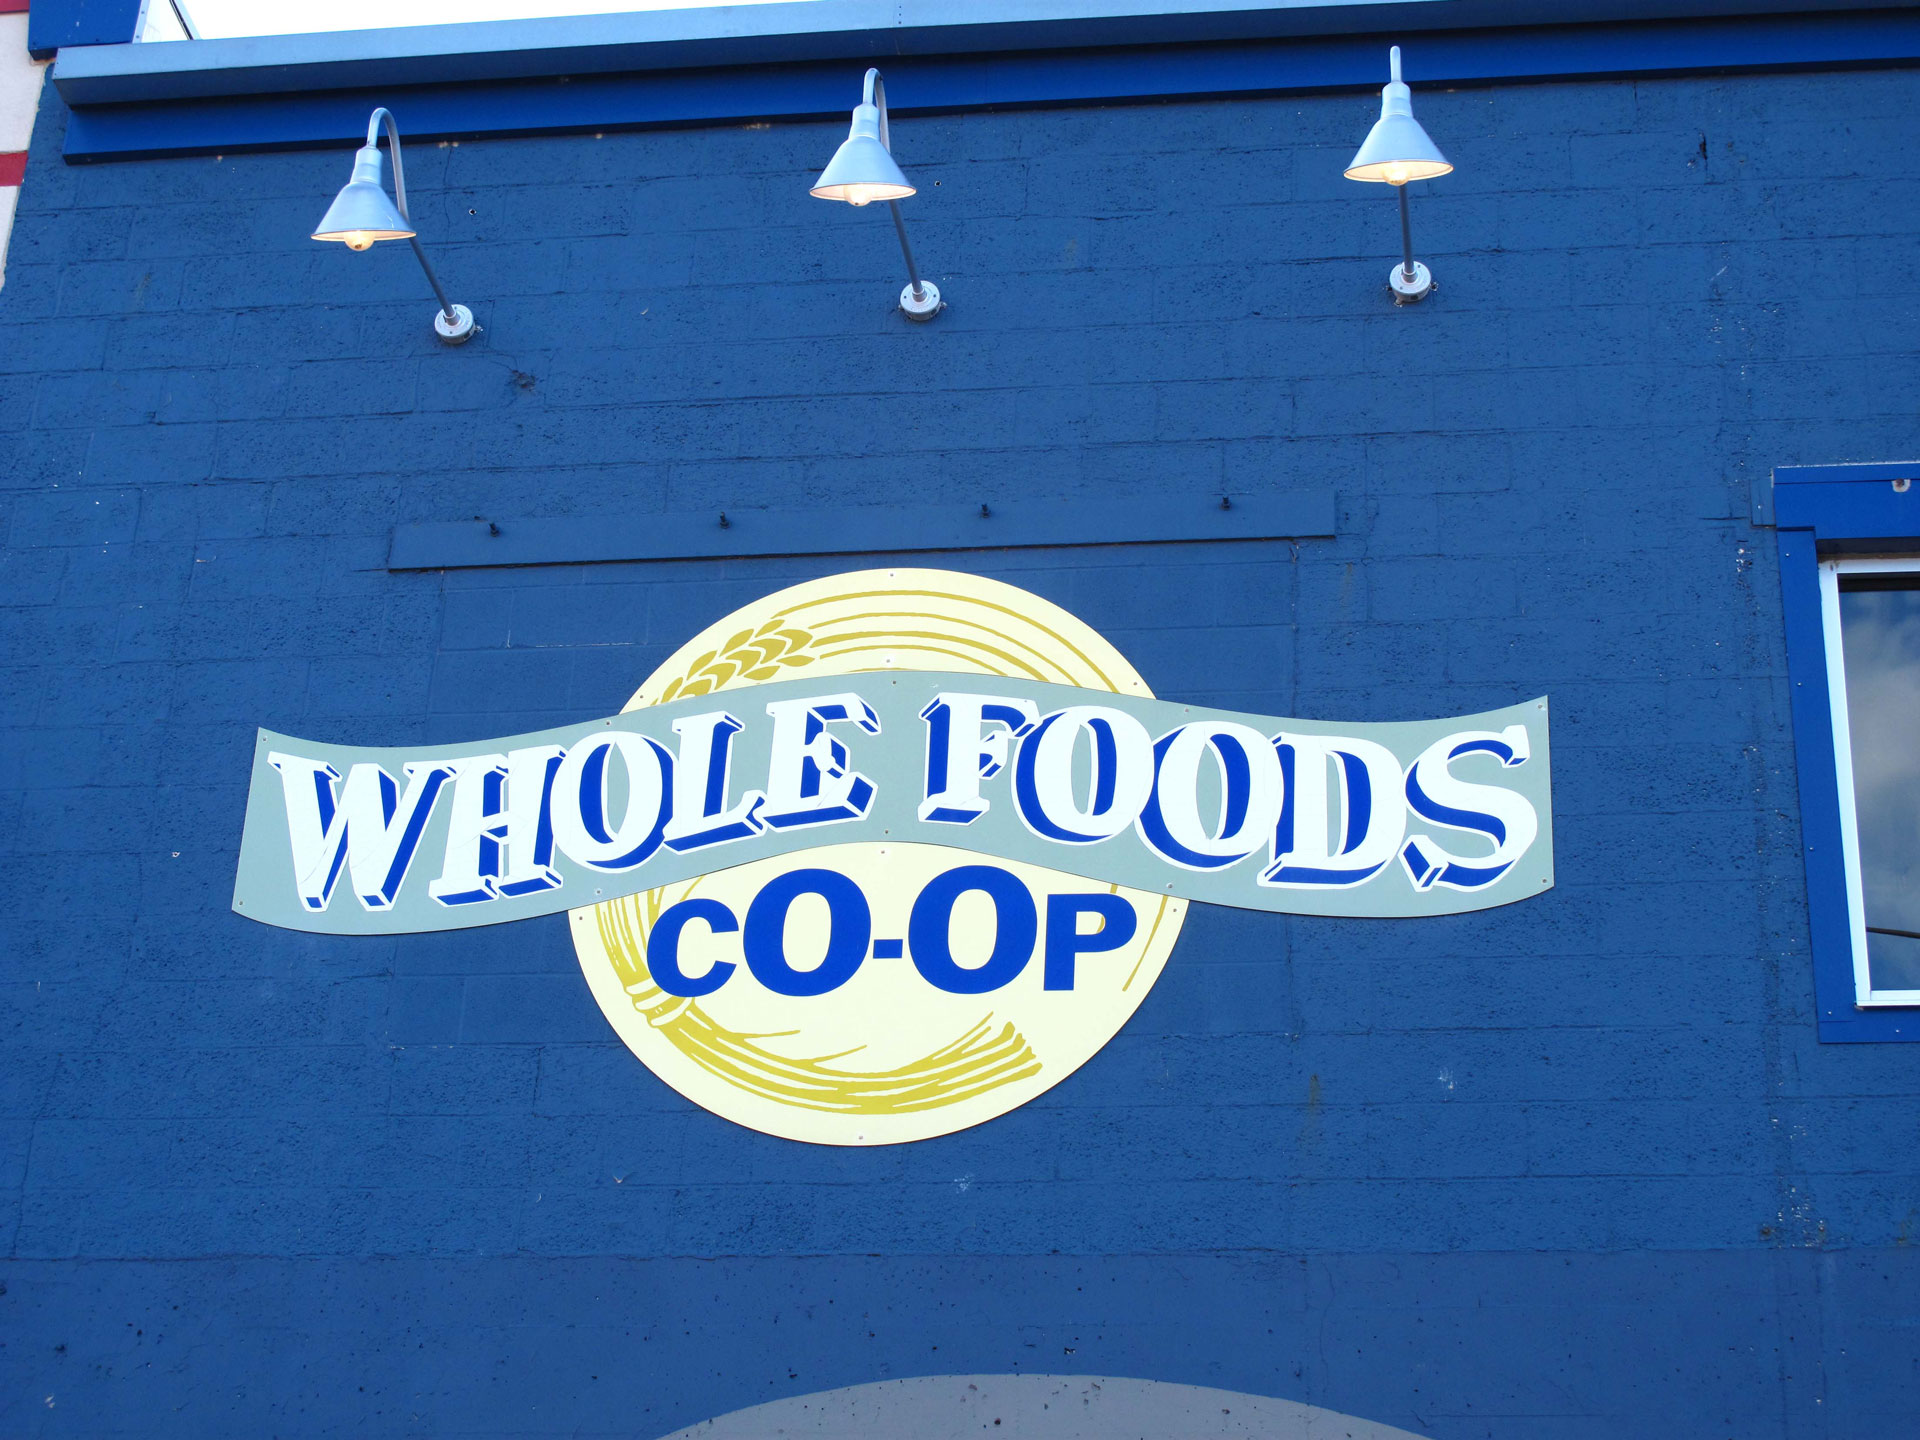 A blue storefront wall with three industrial light fixtures illuminates a circular sign that proudly reads "Whole Foods Coop Duluth MN" in blue and yellow letters, accompanied by a wheat graphic. A small portion of a window frame is visible on the right side.